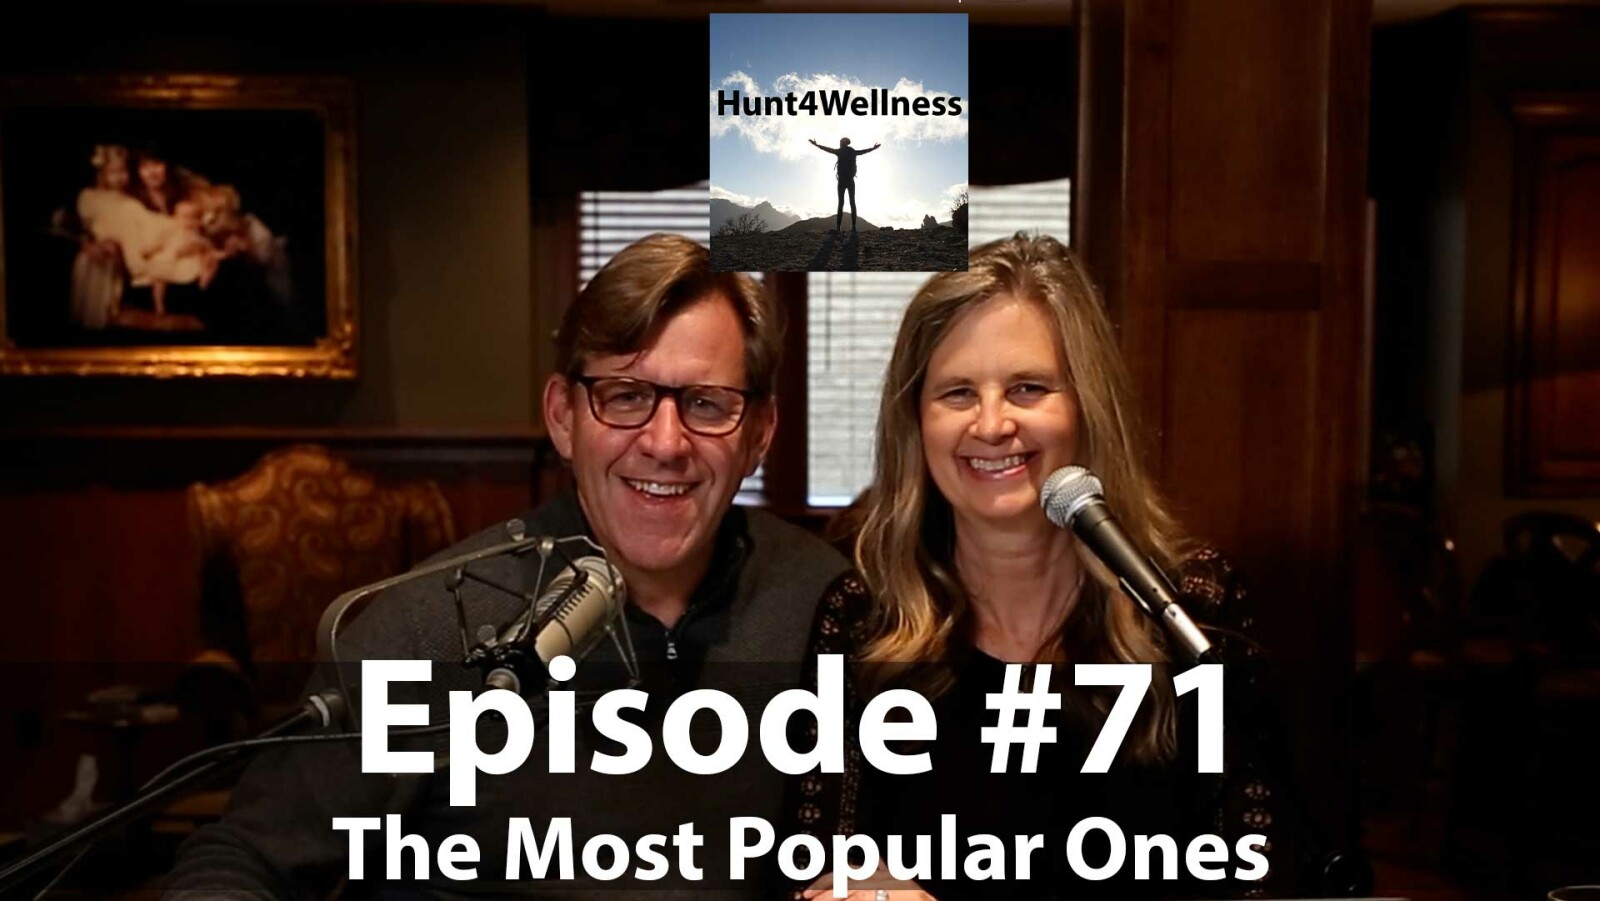 Episode #71 - The Most Poular Ones